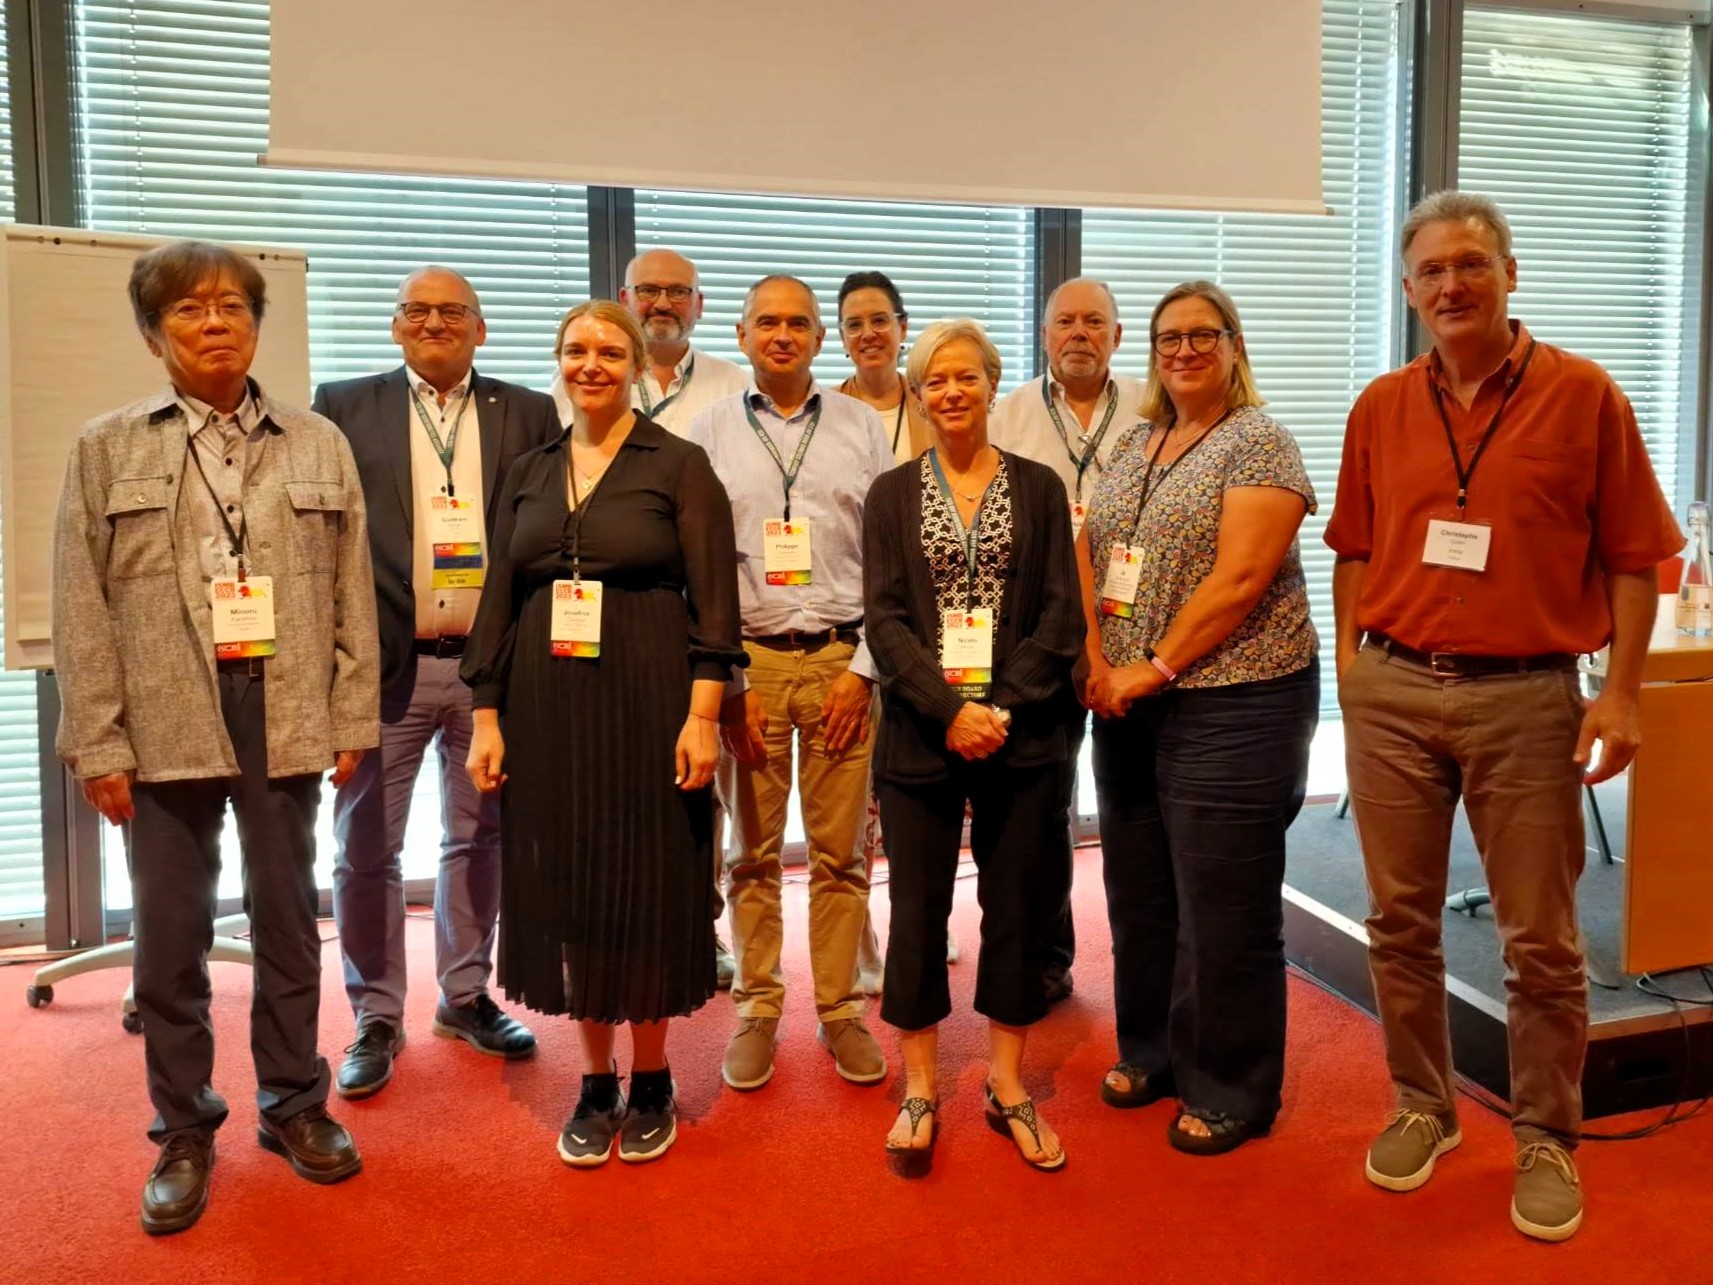 HFSP Speakers at ISMB